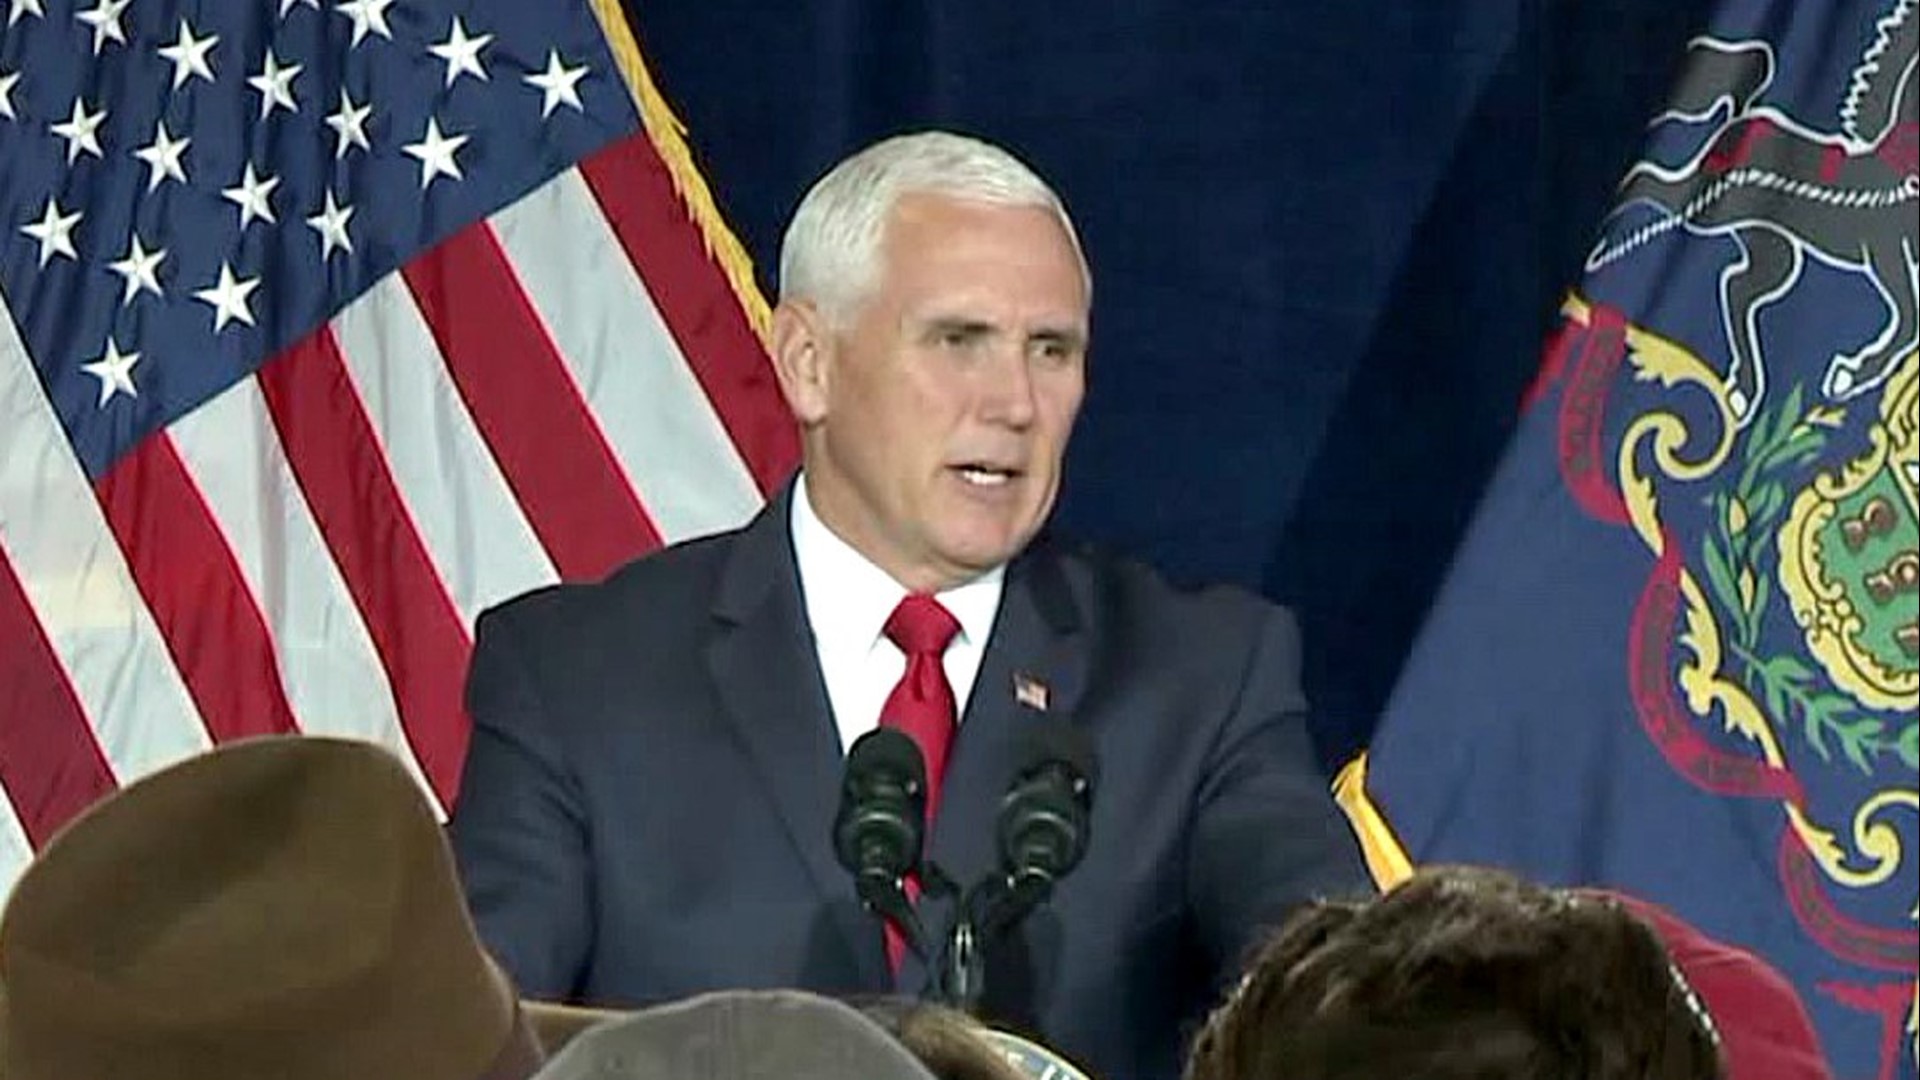 The vice president is set to attend a "Workers for Trump" event in Exeter.